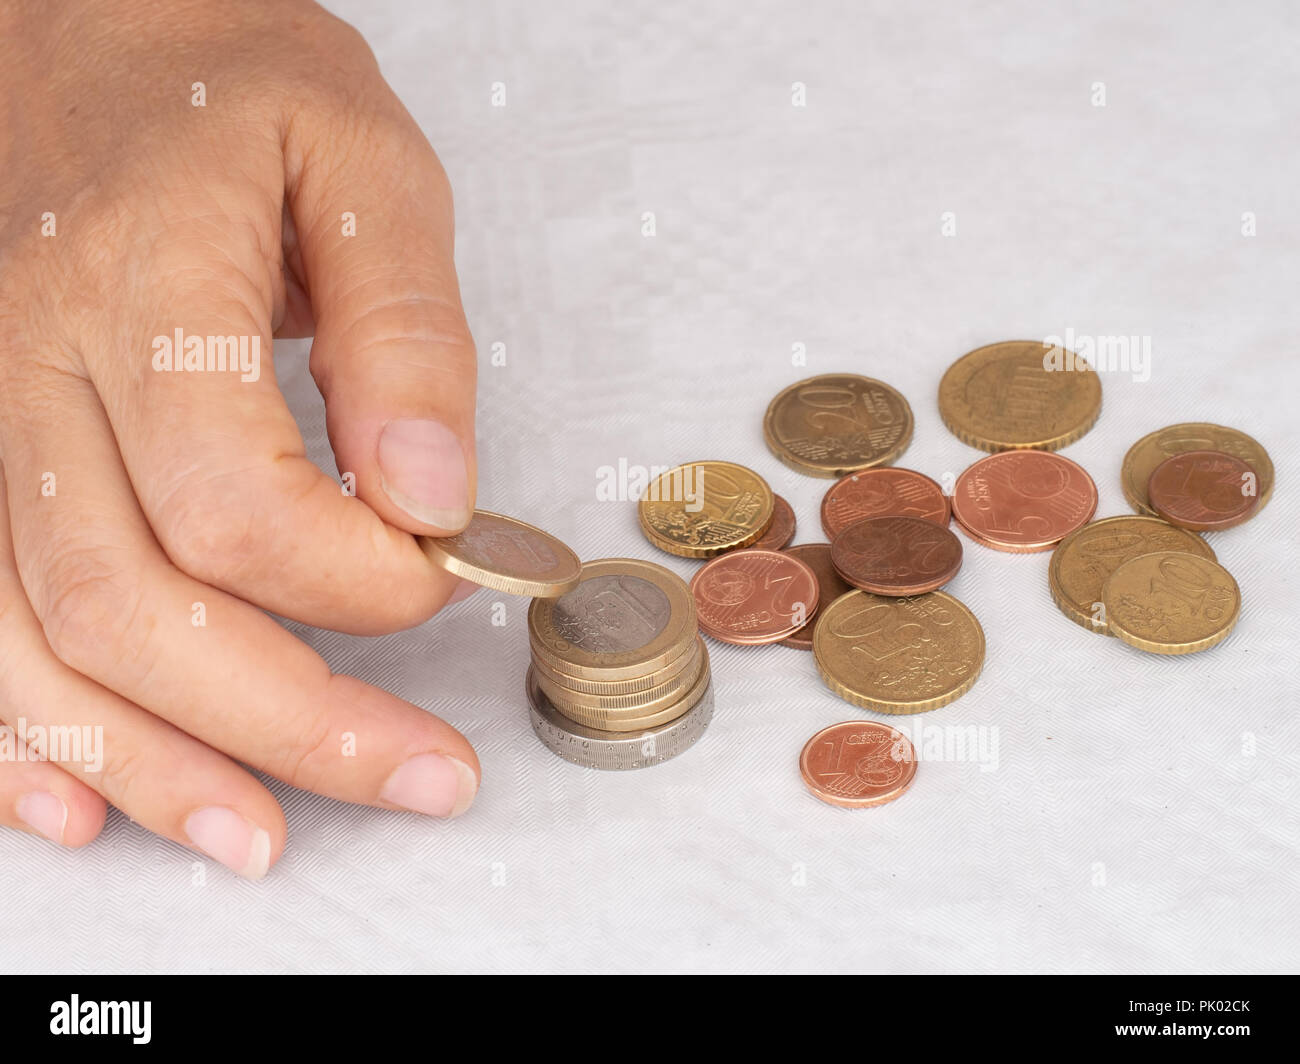 Mature, woman hand putting coins into a pile, heap, on white tablecloth background. Close. European euro coins, counting pennies, small change. Stock Photo